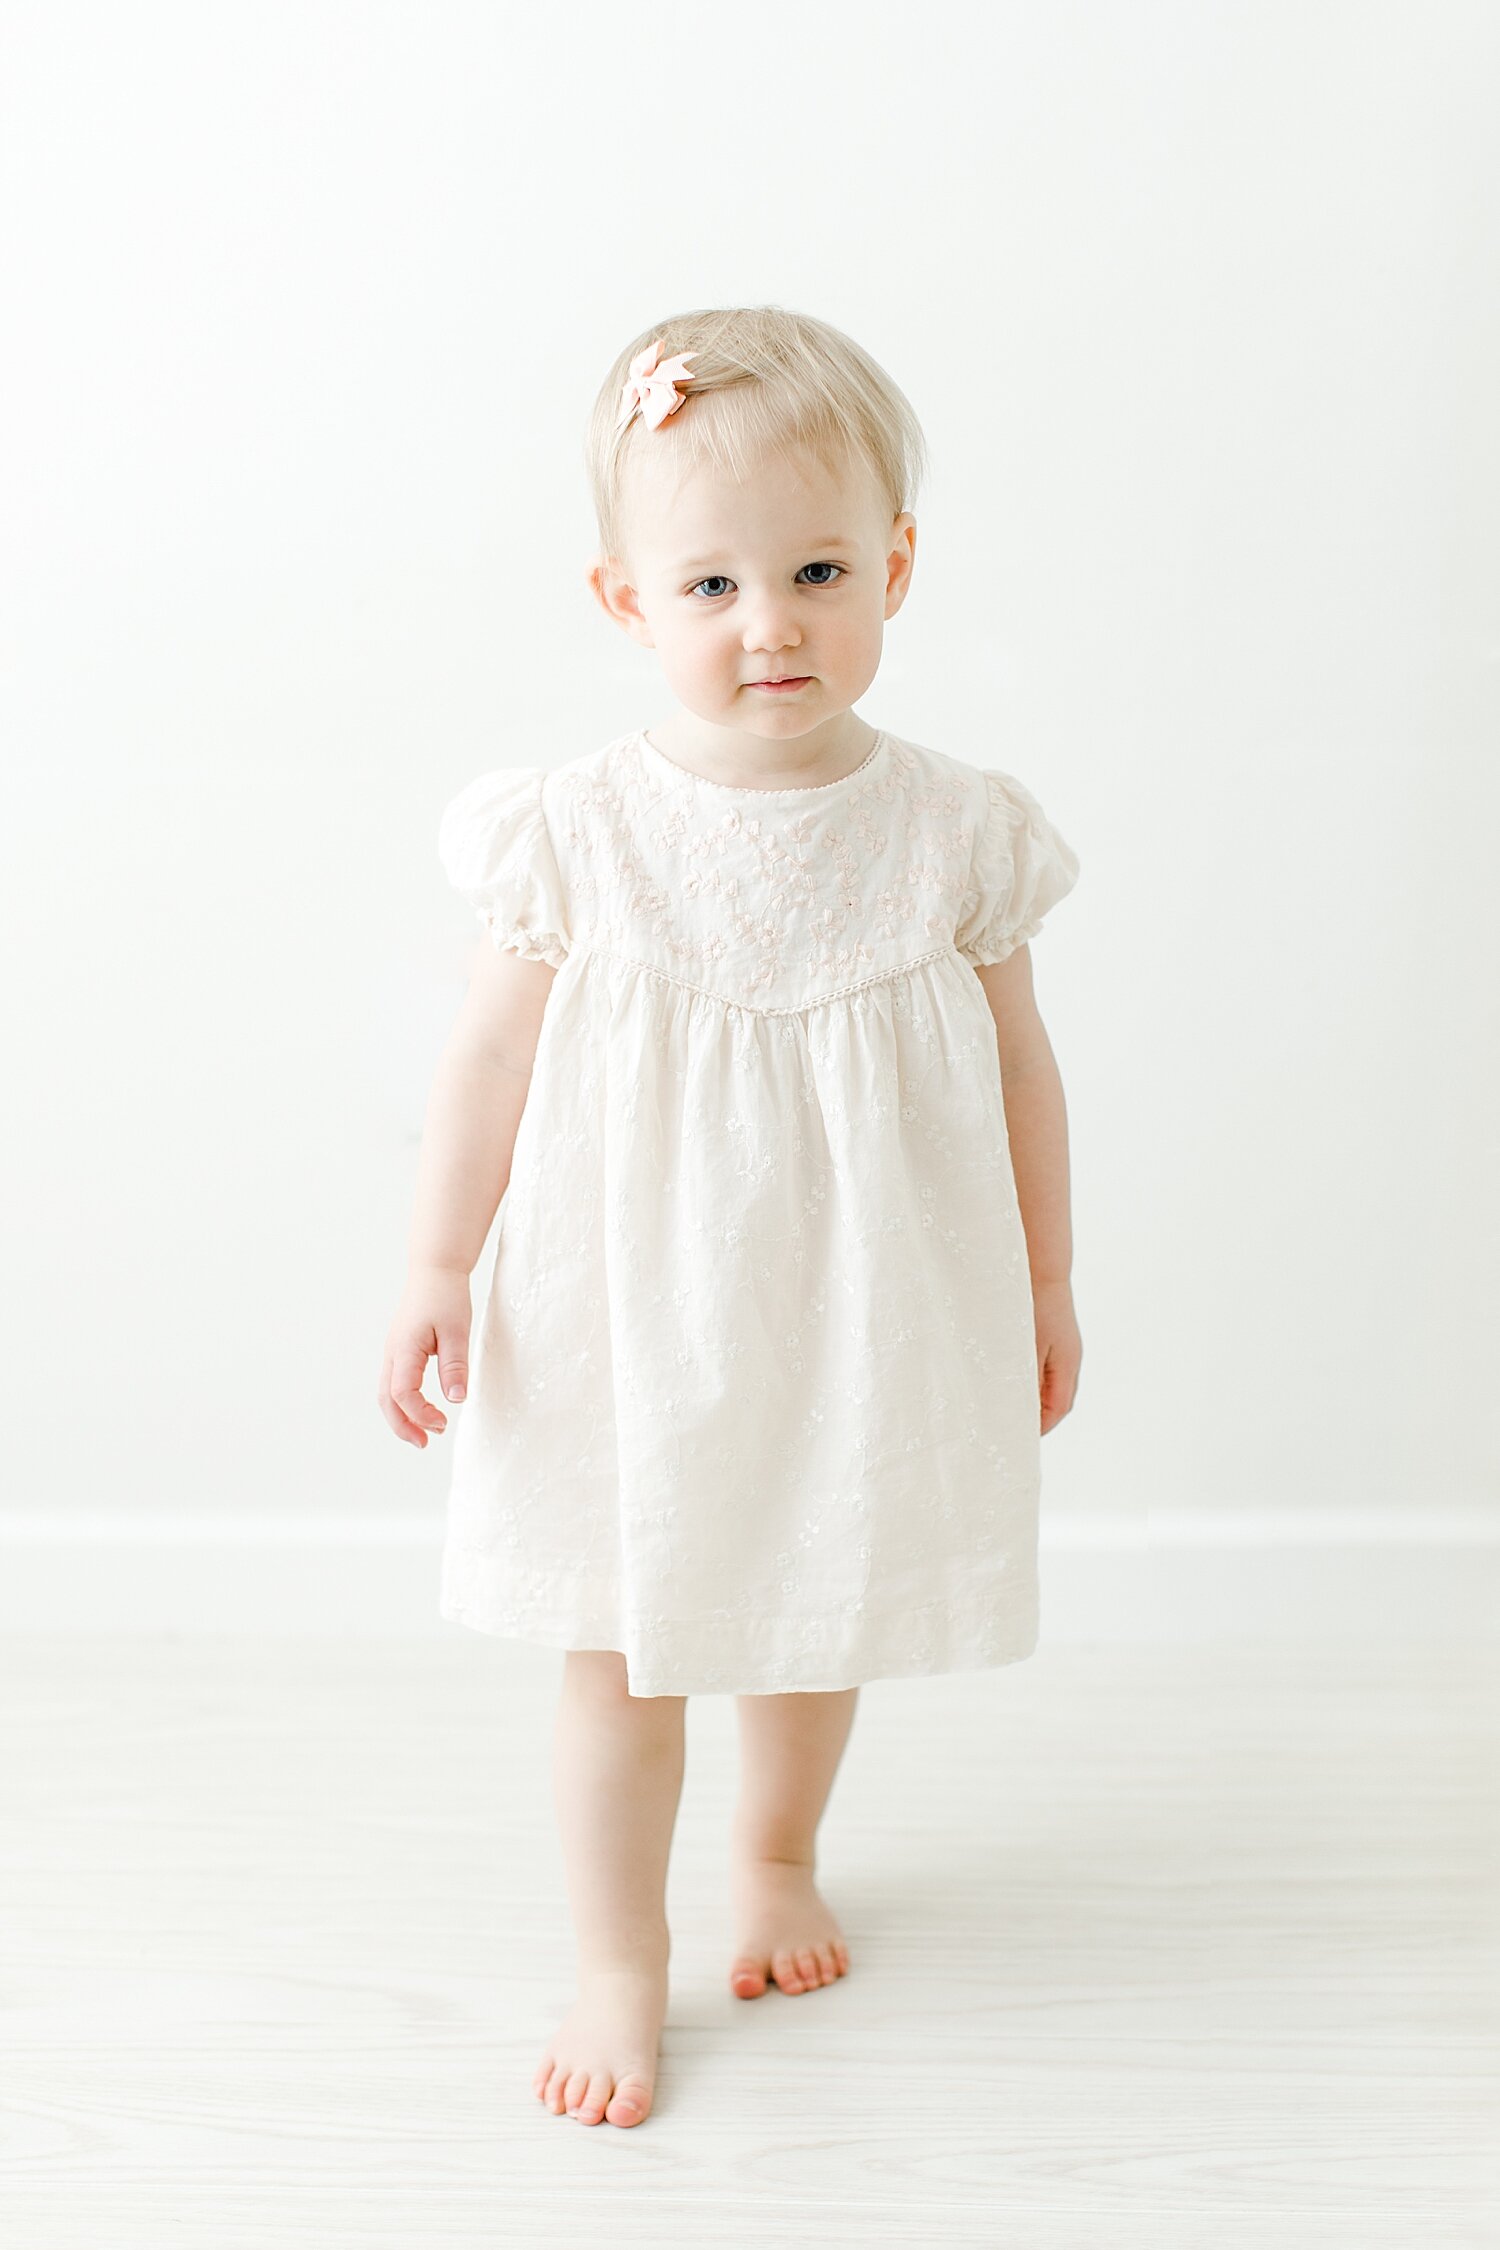 18 month old standing in a soft pink eyelet dress. Photo by Kristin Wood Photography.